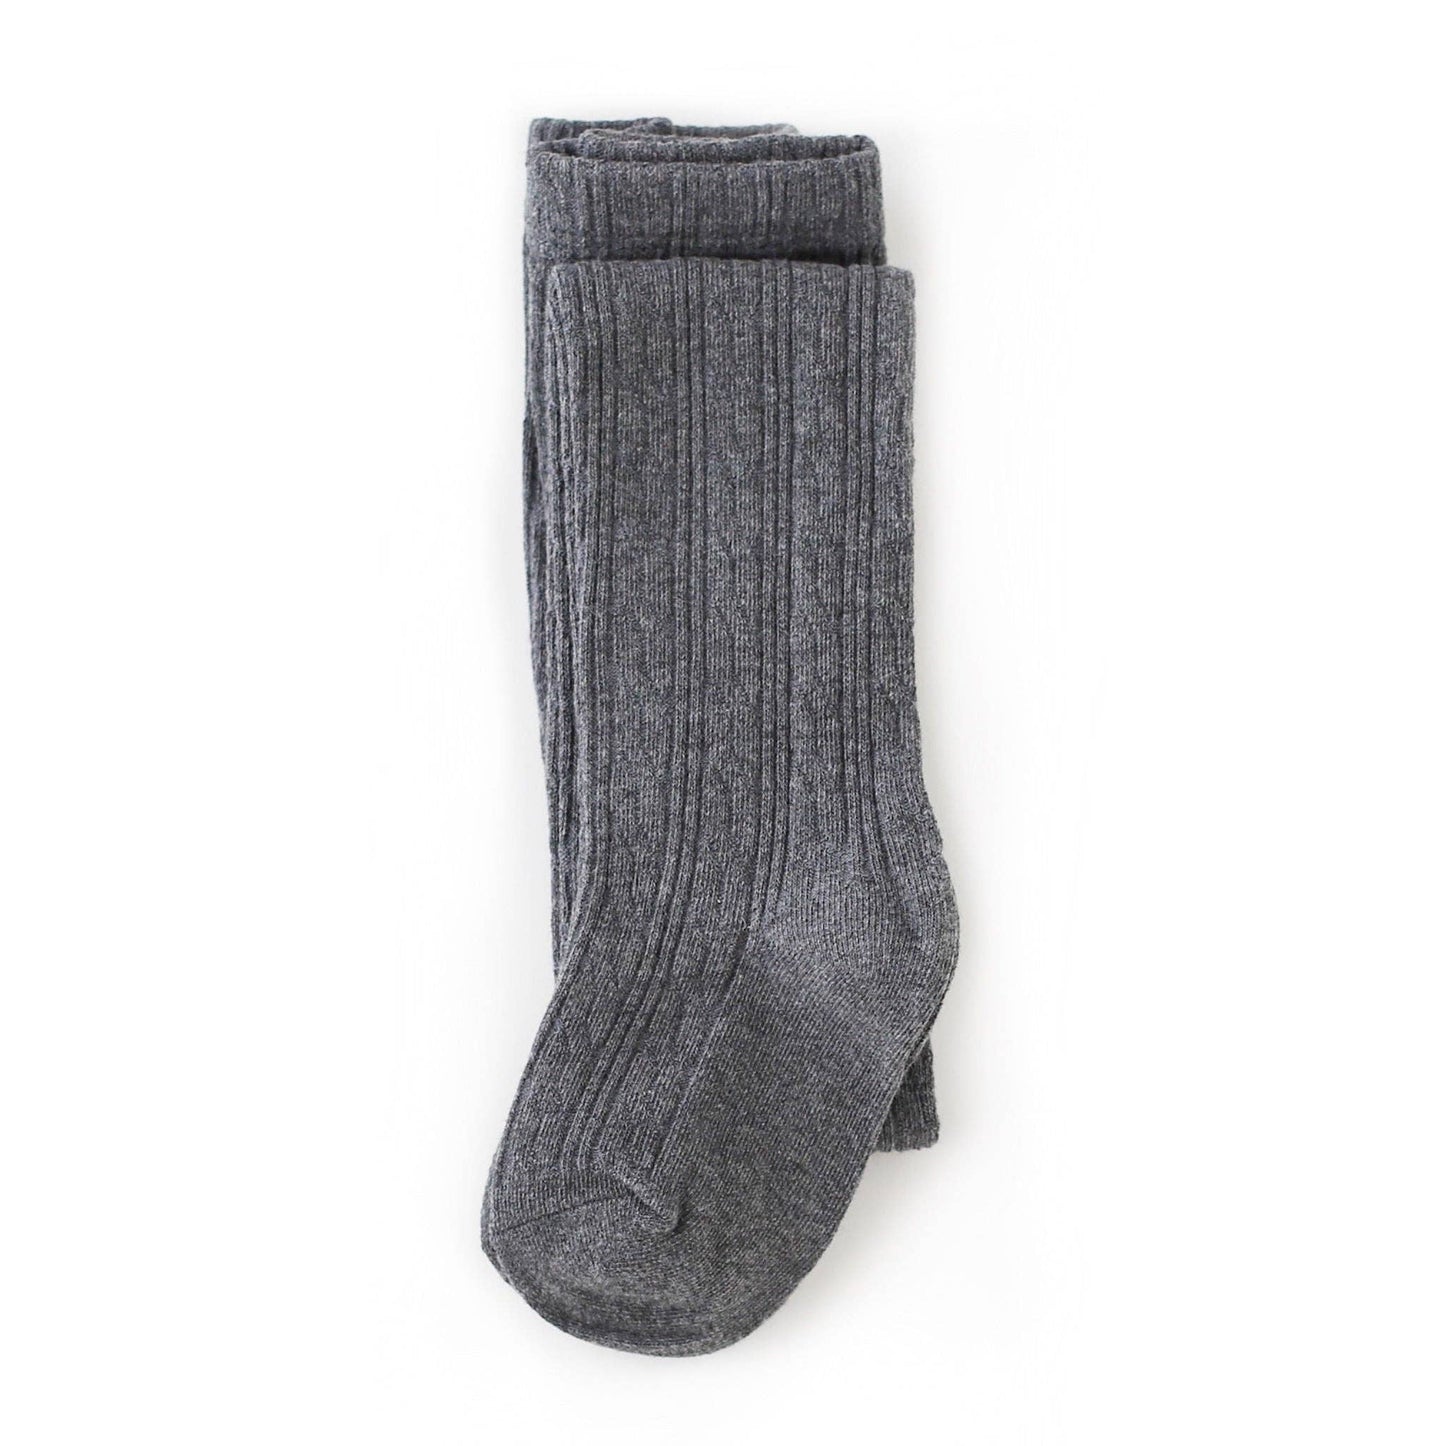 Charcoal Gray Cable Knit Tights: 3-4 YEARS